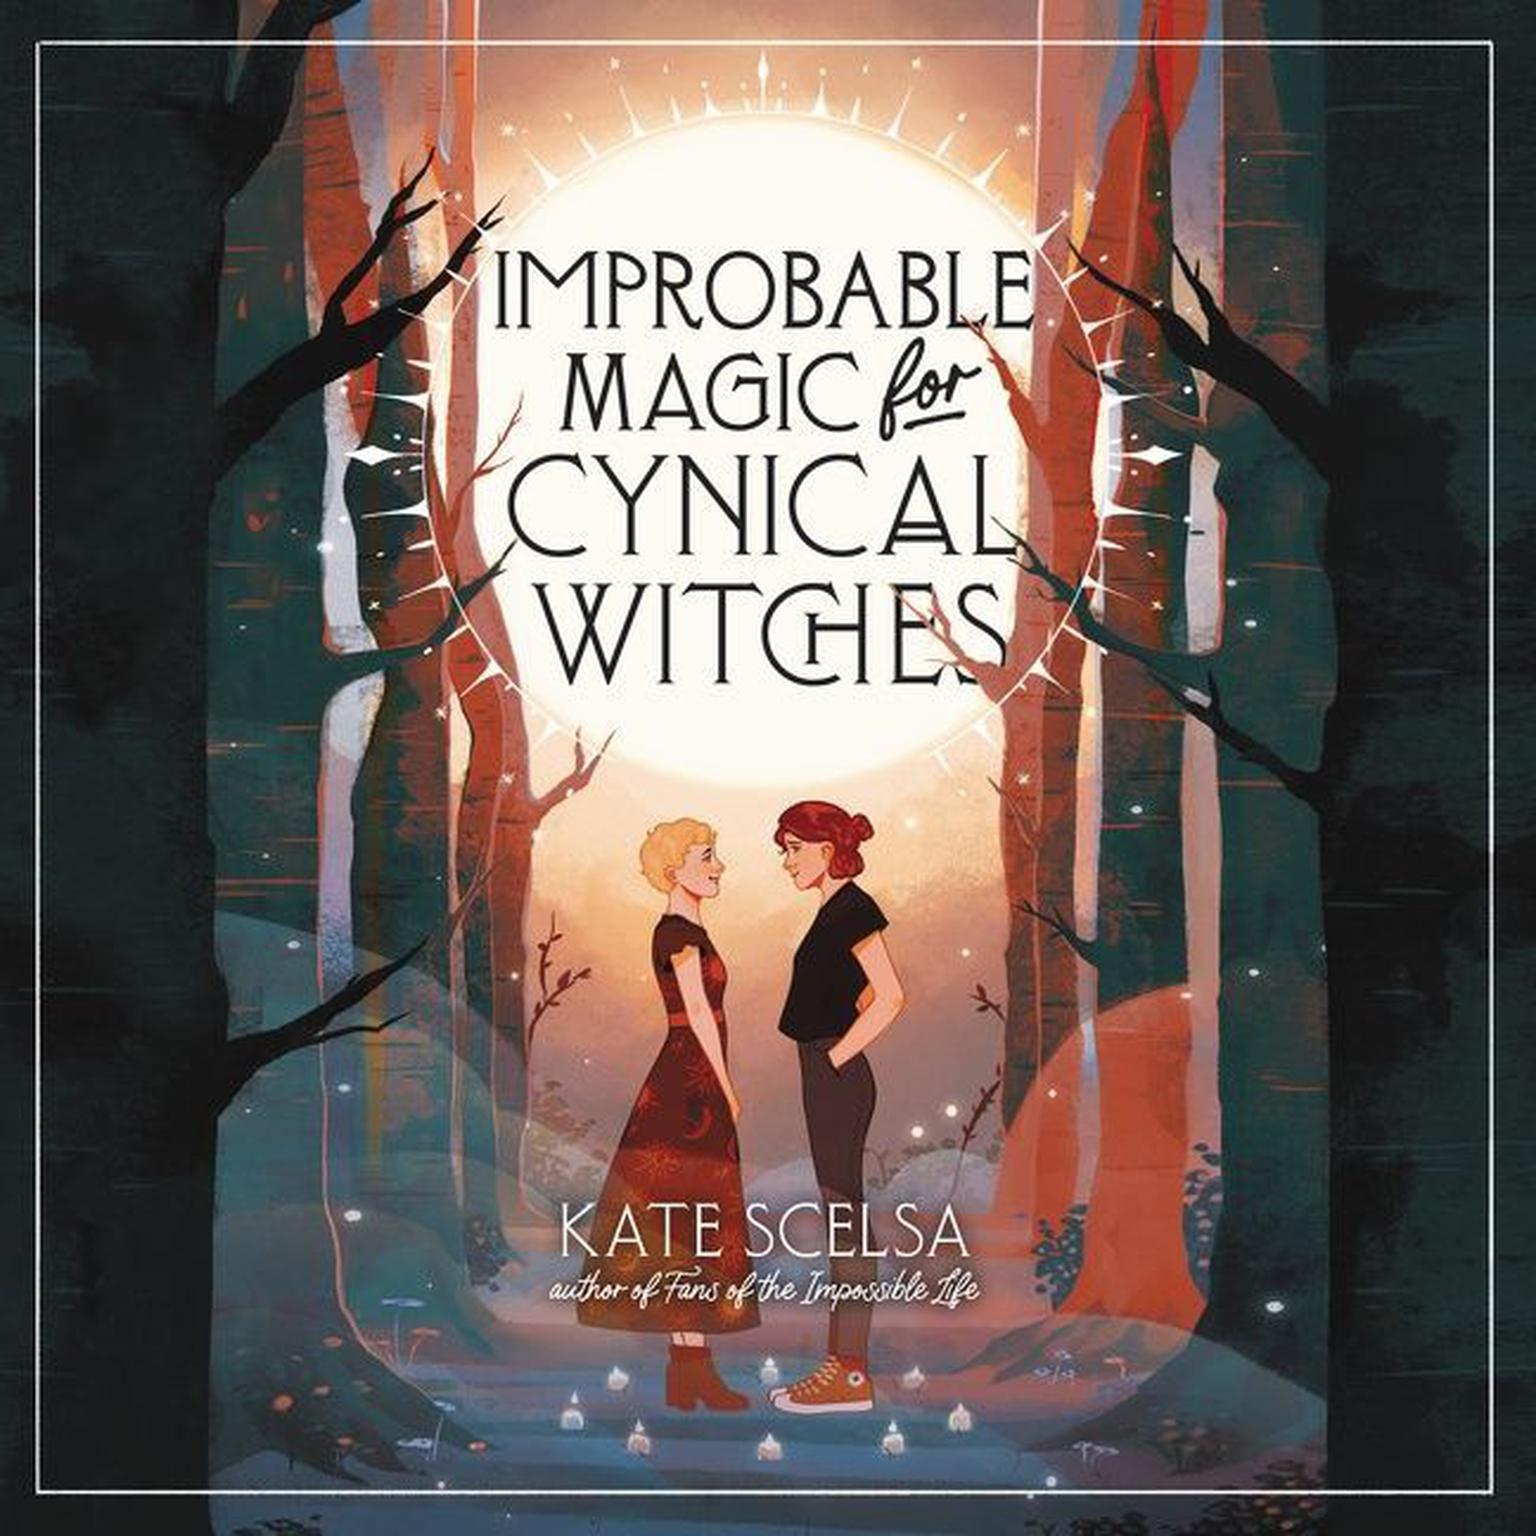 Improbable Magic for Cynical Witches Audiobook, by Kate Scelsa